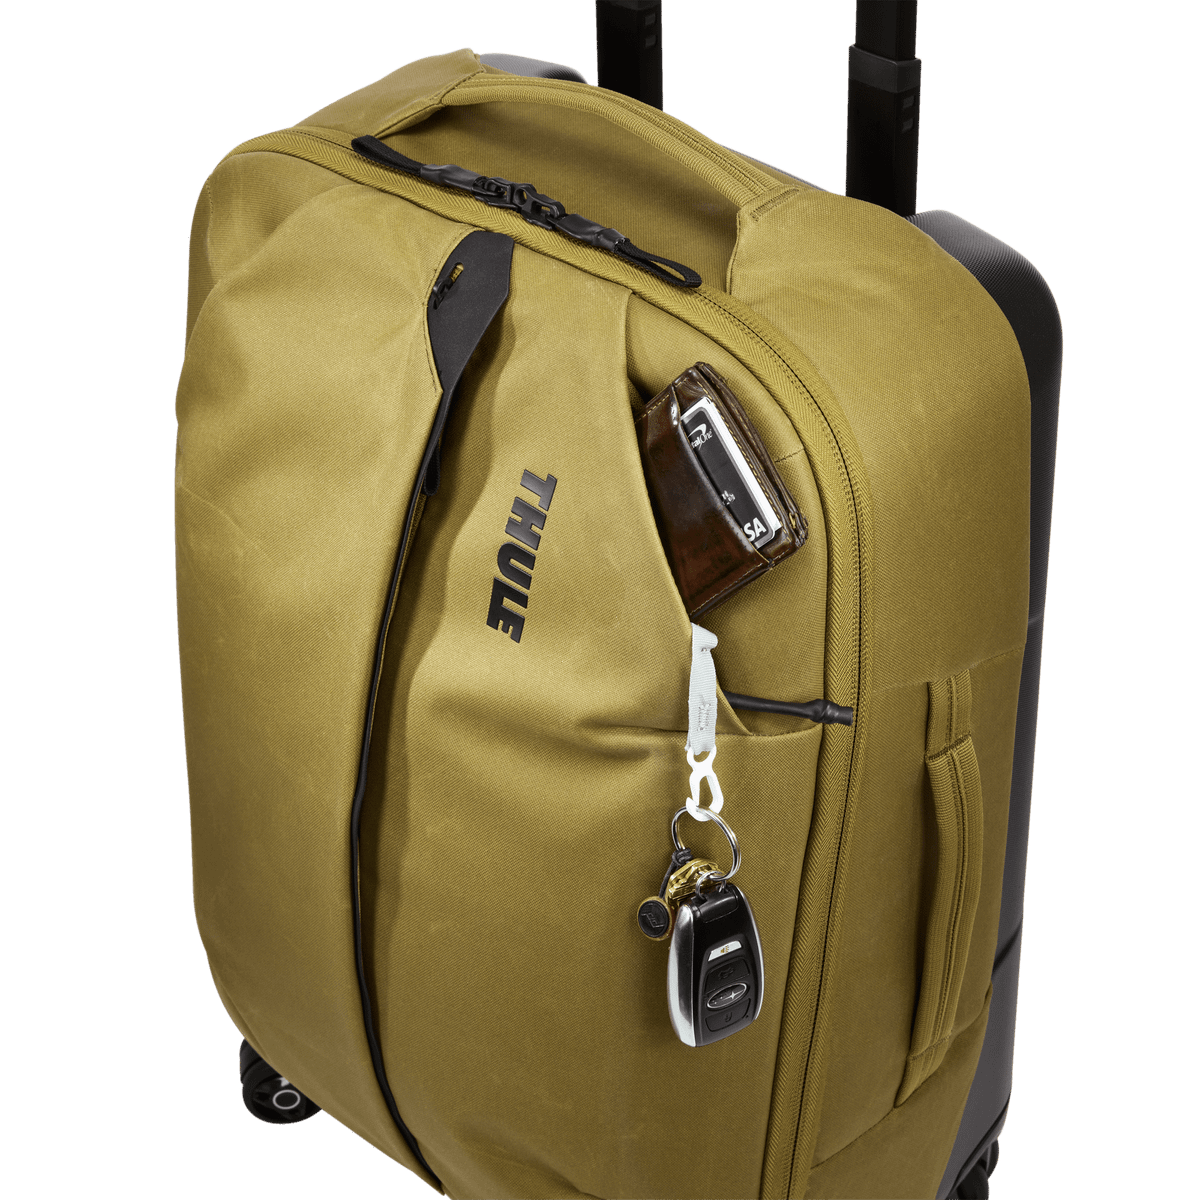 Thule Aion carry on spinner Nutria brown